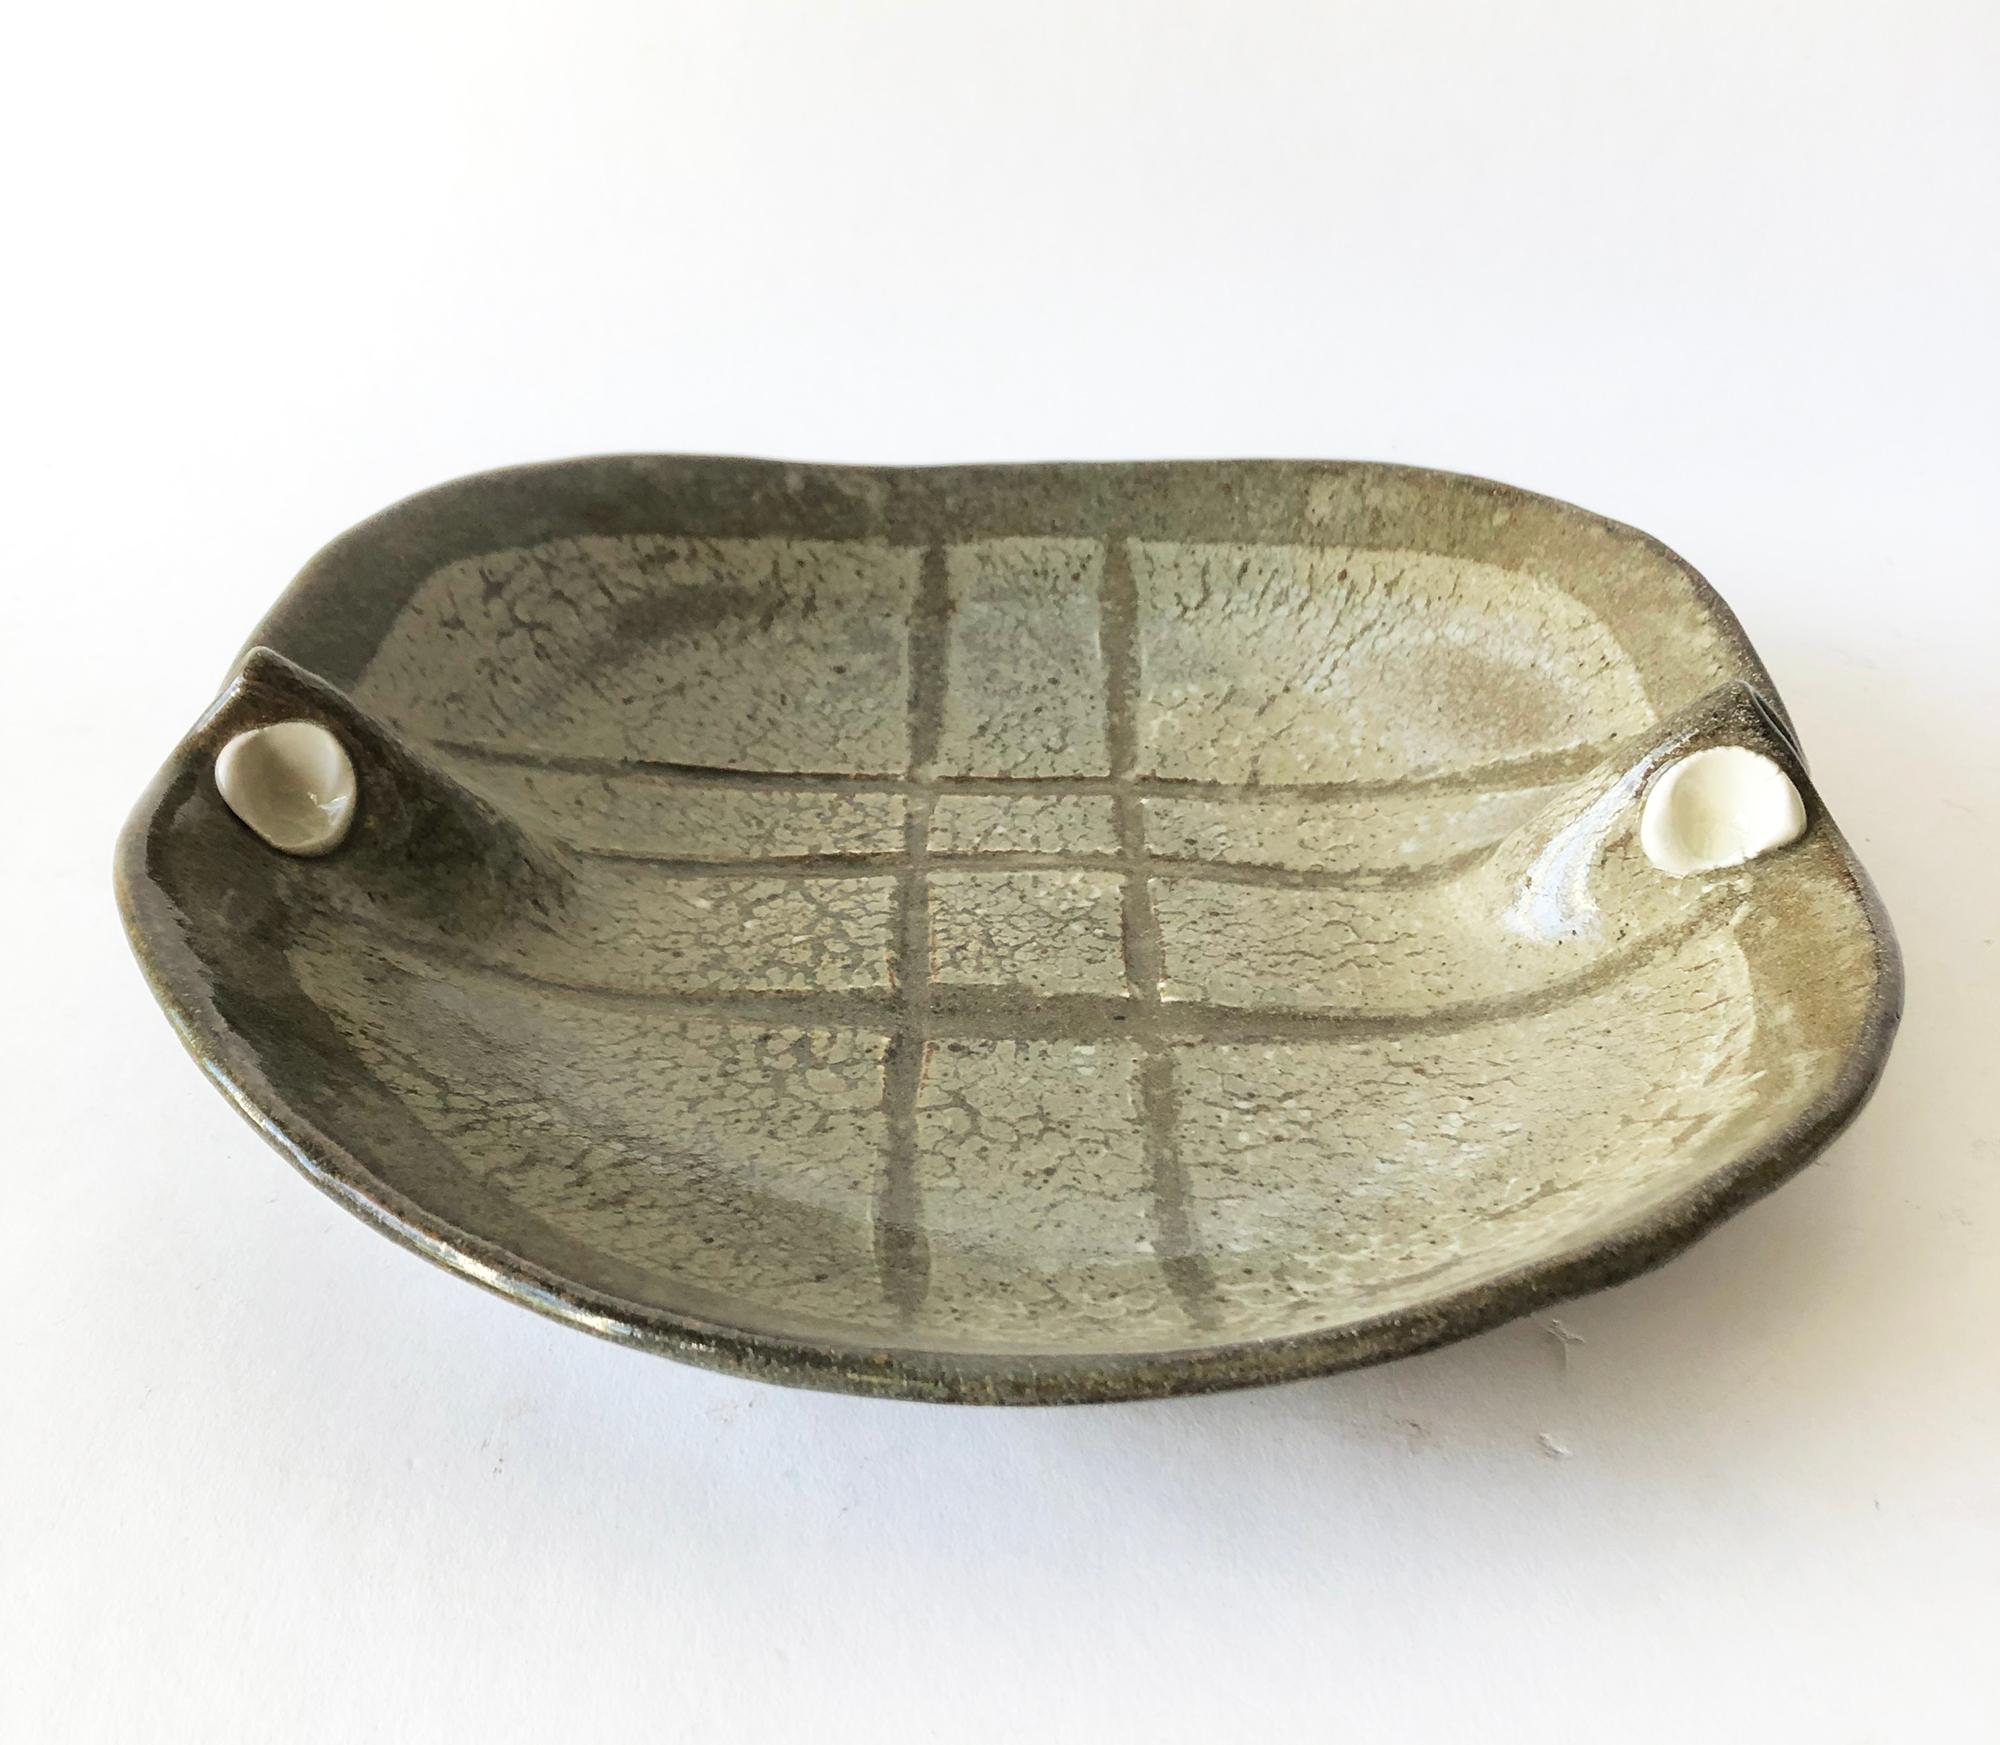 Stoneware open bowl with porcelain accents and grid design created by artist Sawako. Bowl measures 11